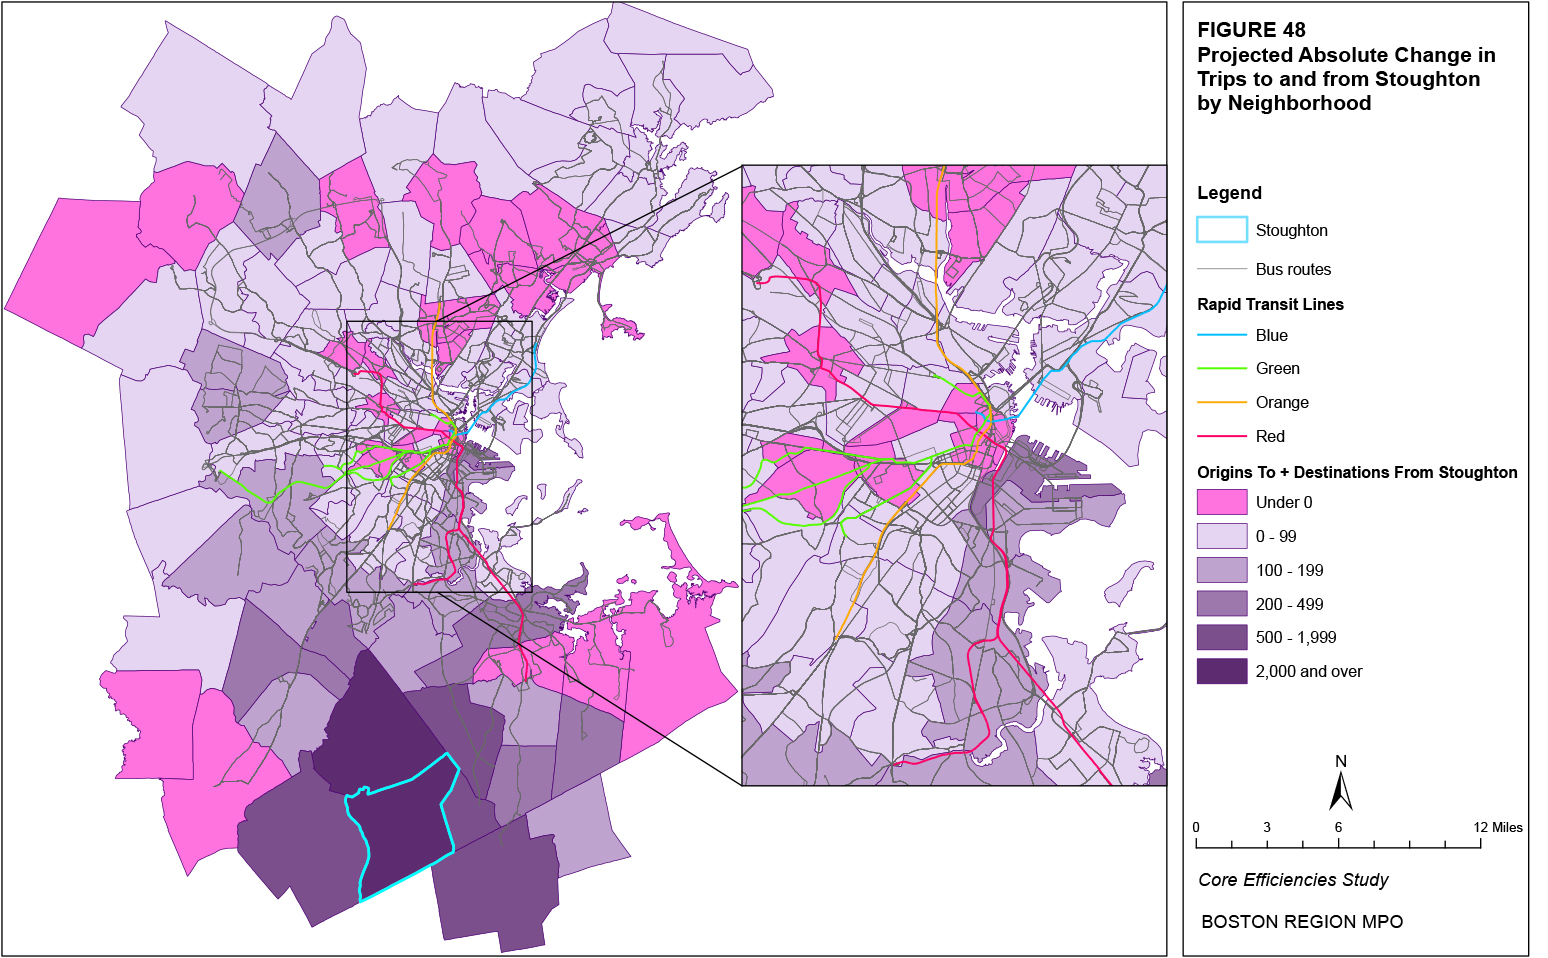 This map shows the projected absolute change in trips to and from the Stoughton neighborhood by neighborhood.